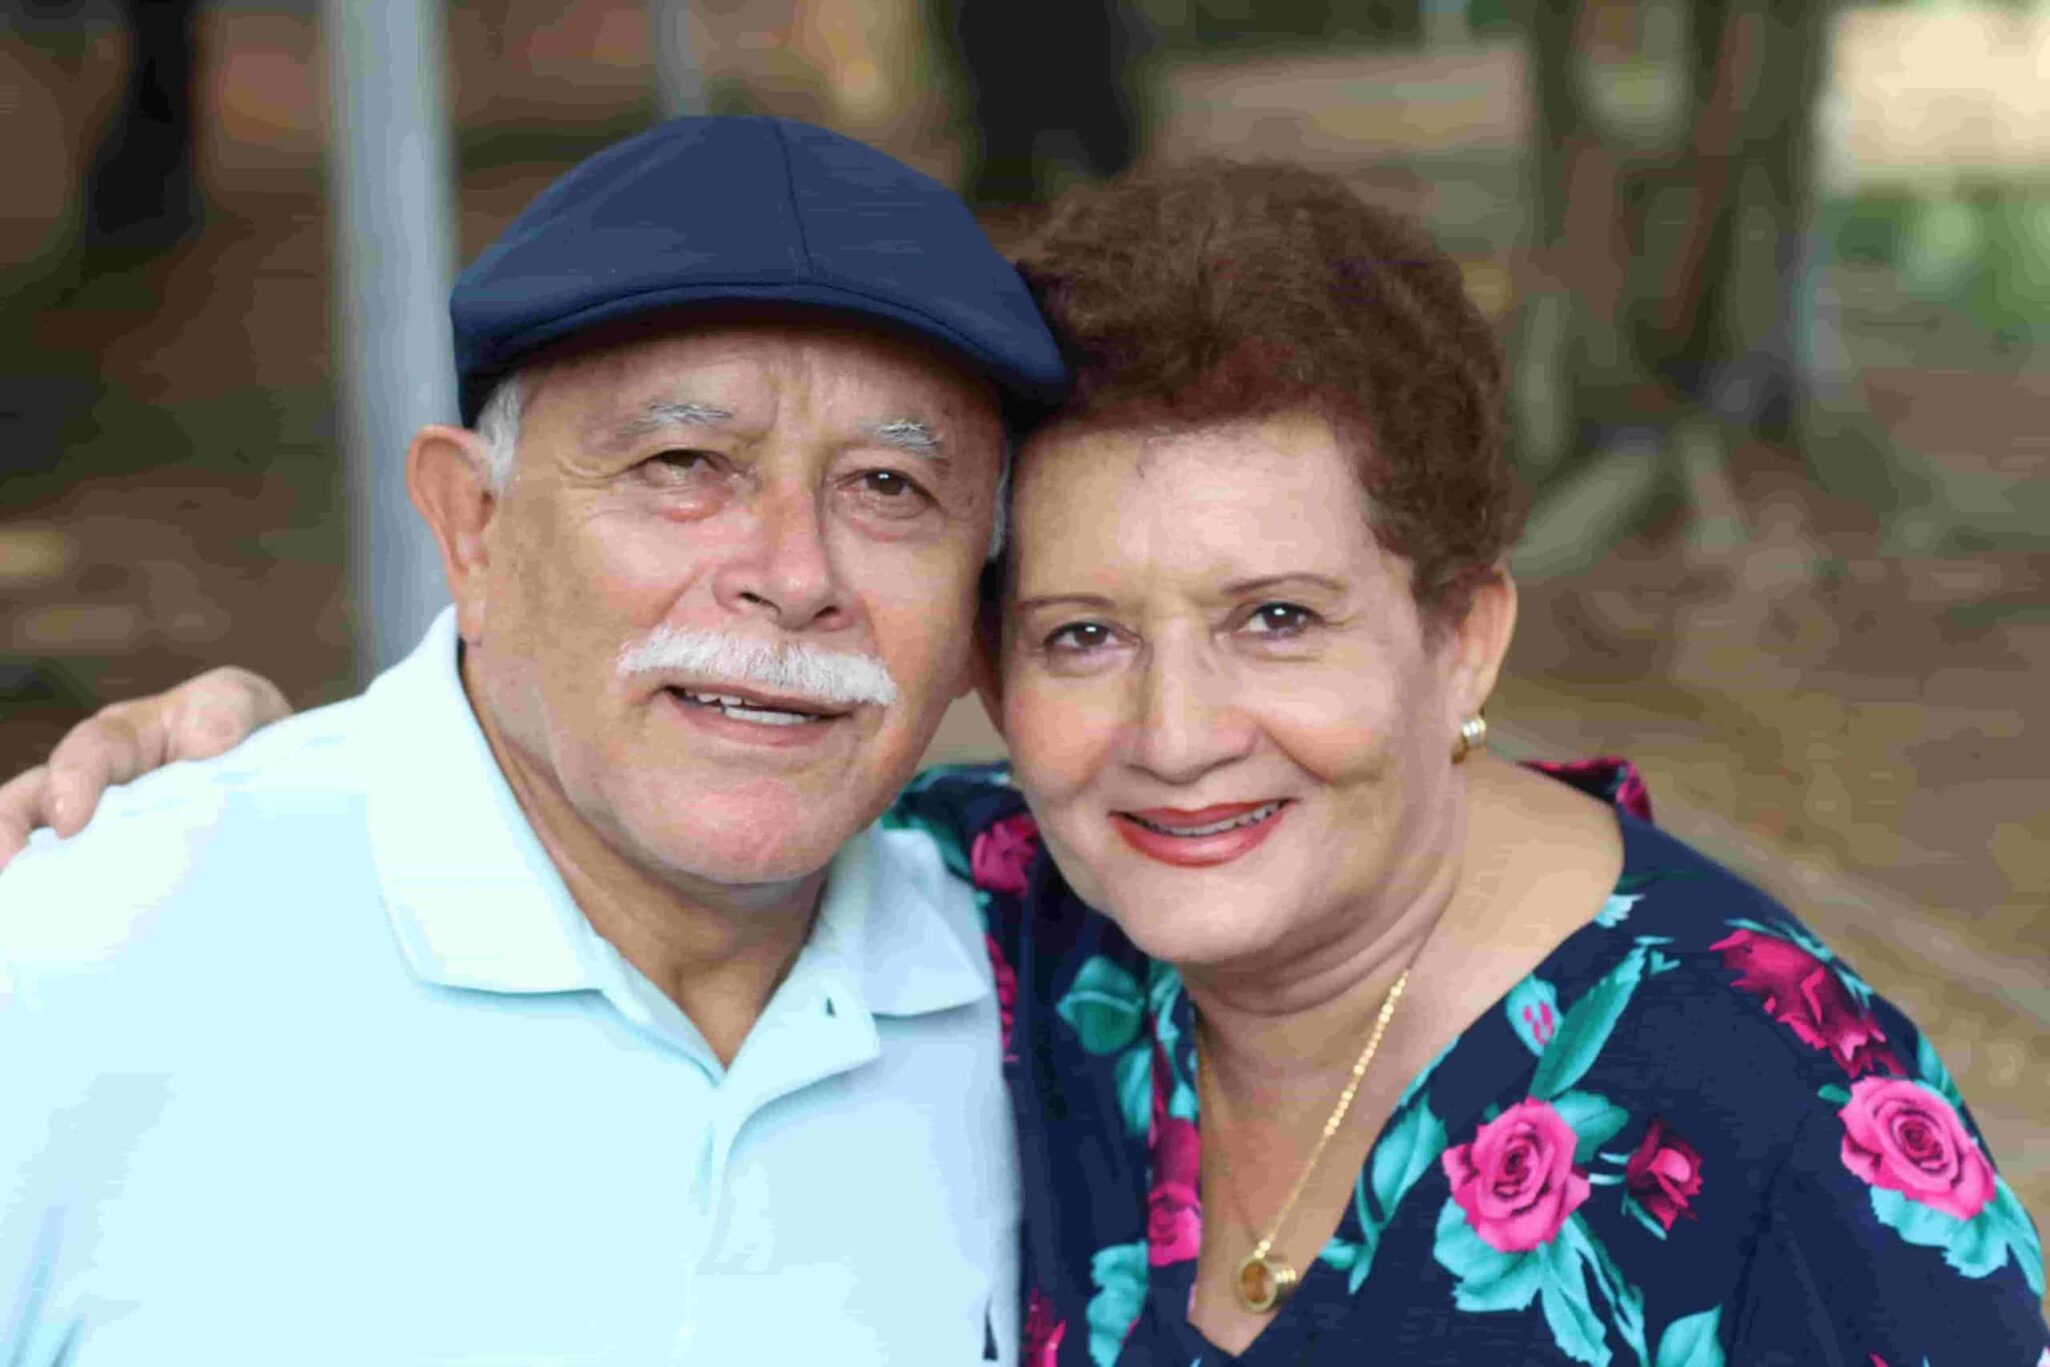 An elderly couple hugging and smiling for the camera